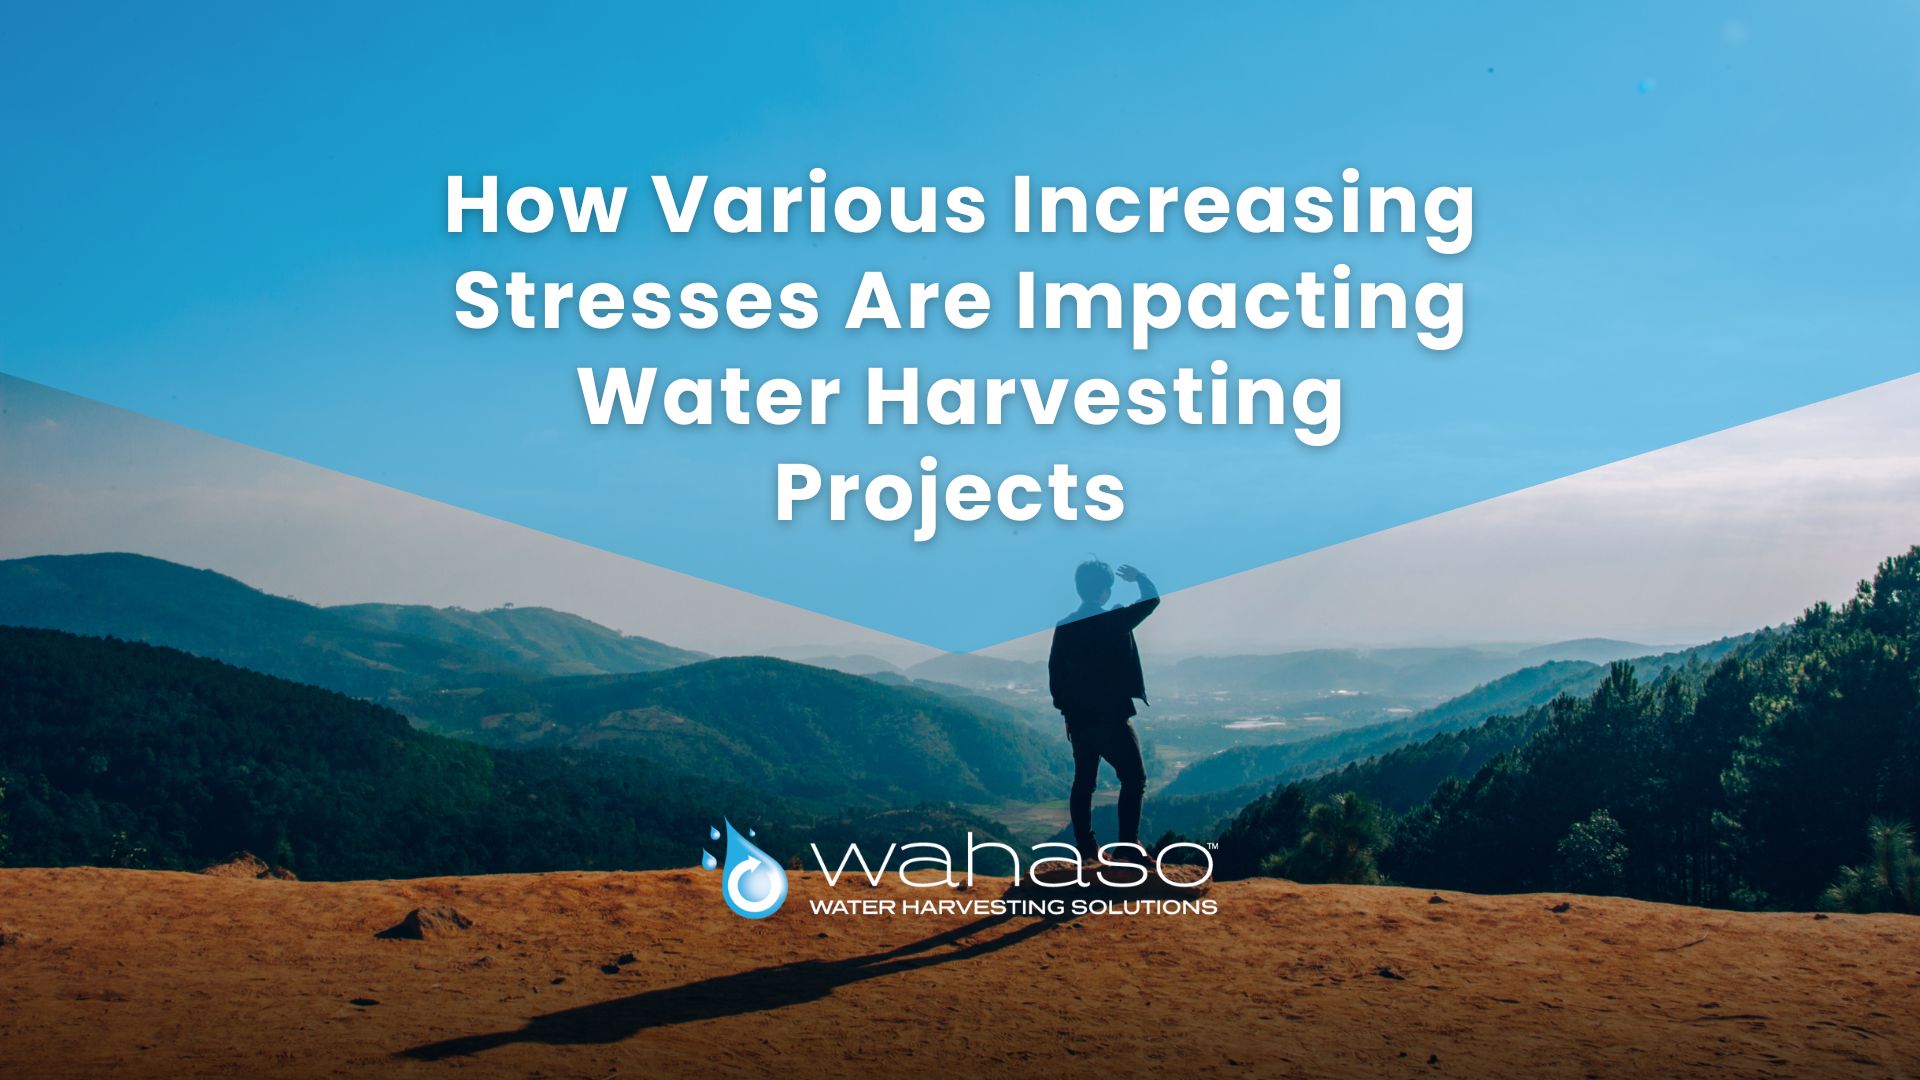 How Various Increasing Stresses Are Impacting Water Harvesting Projects